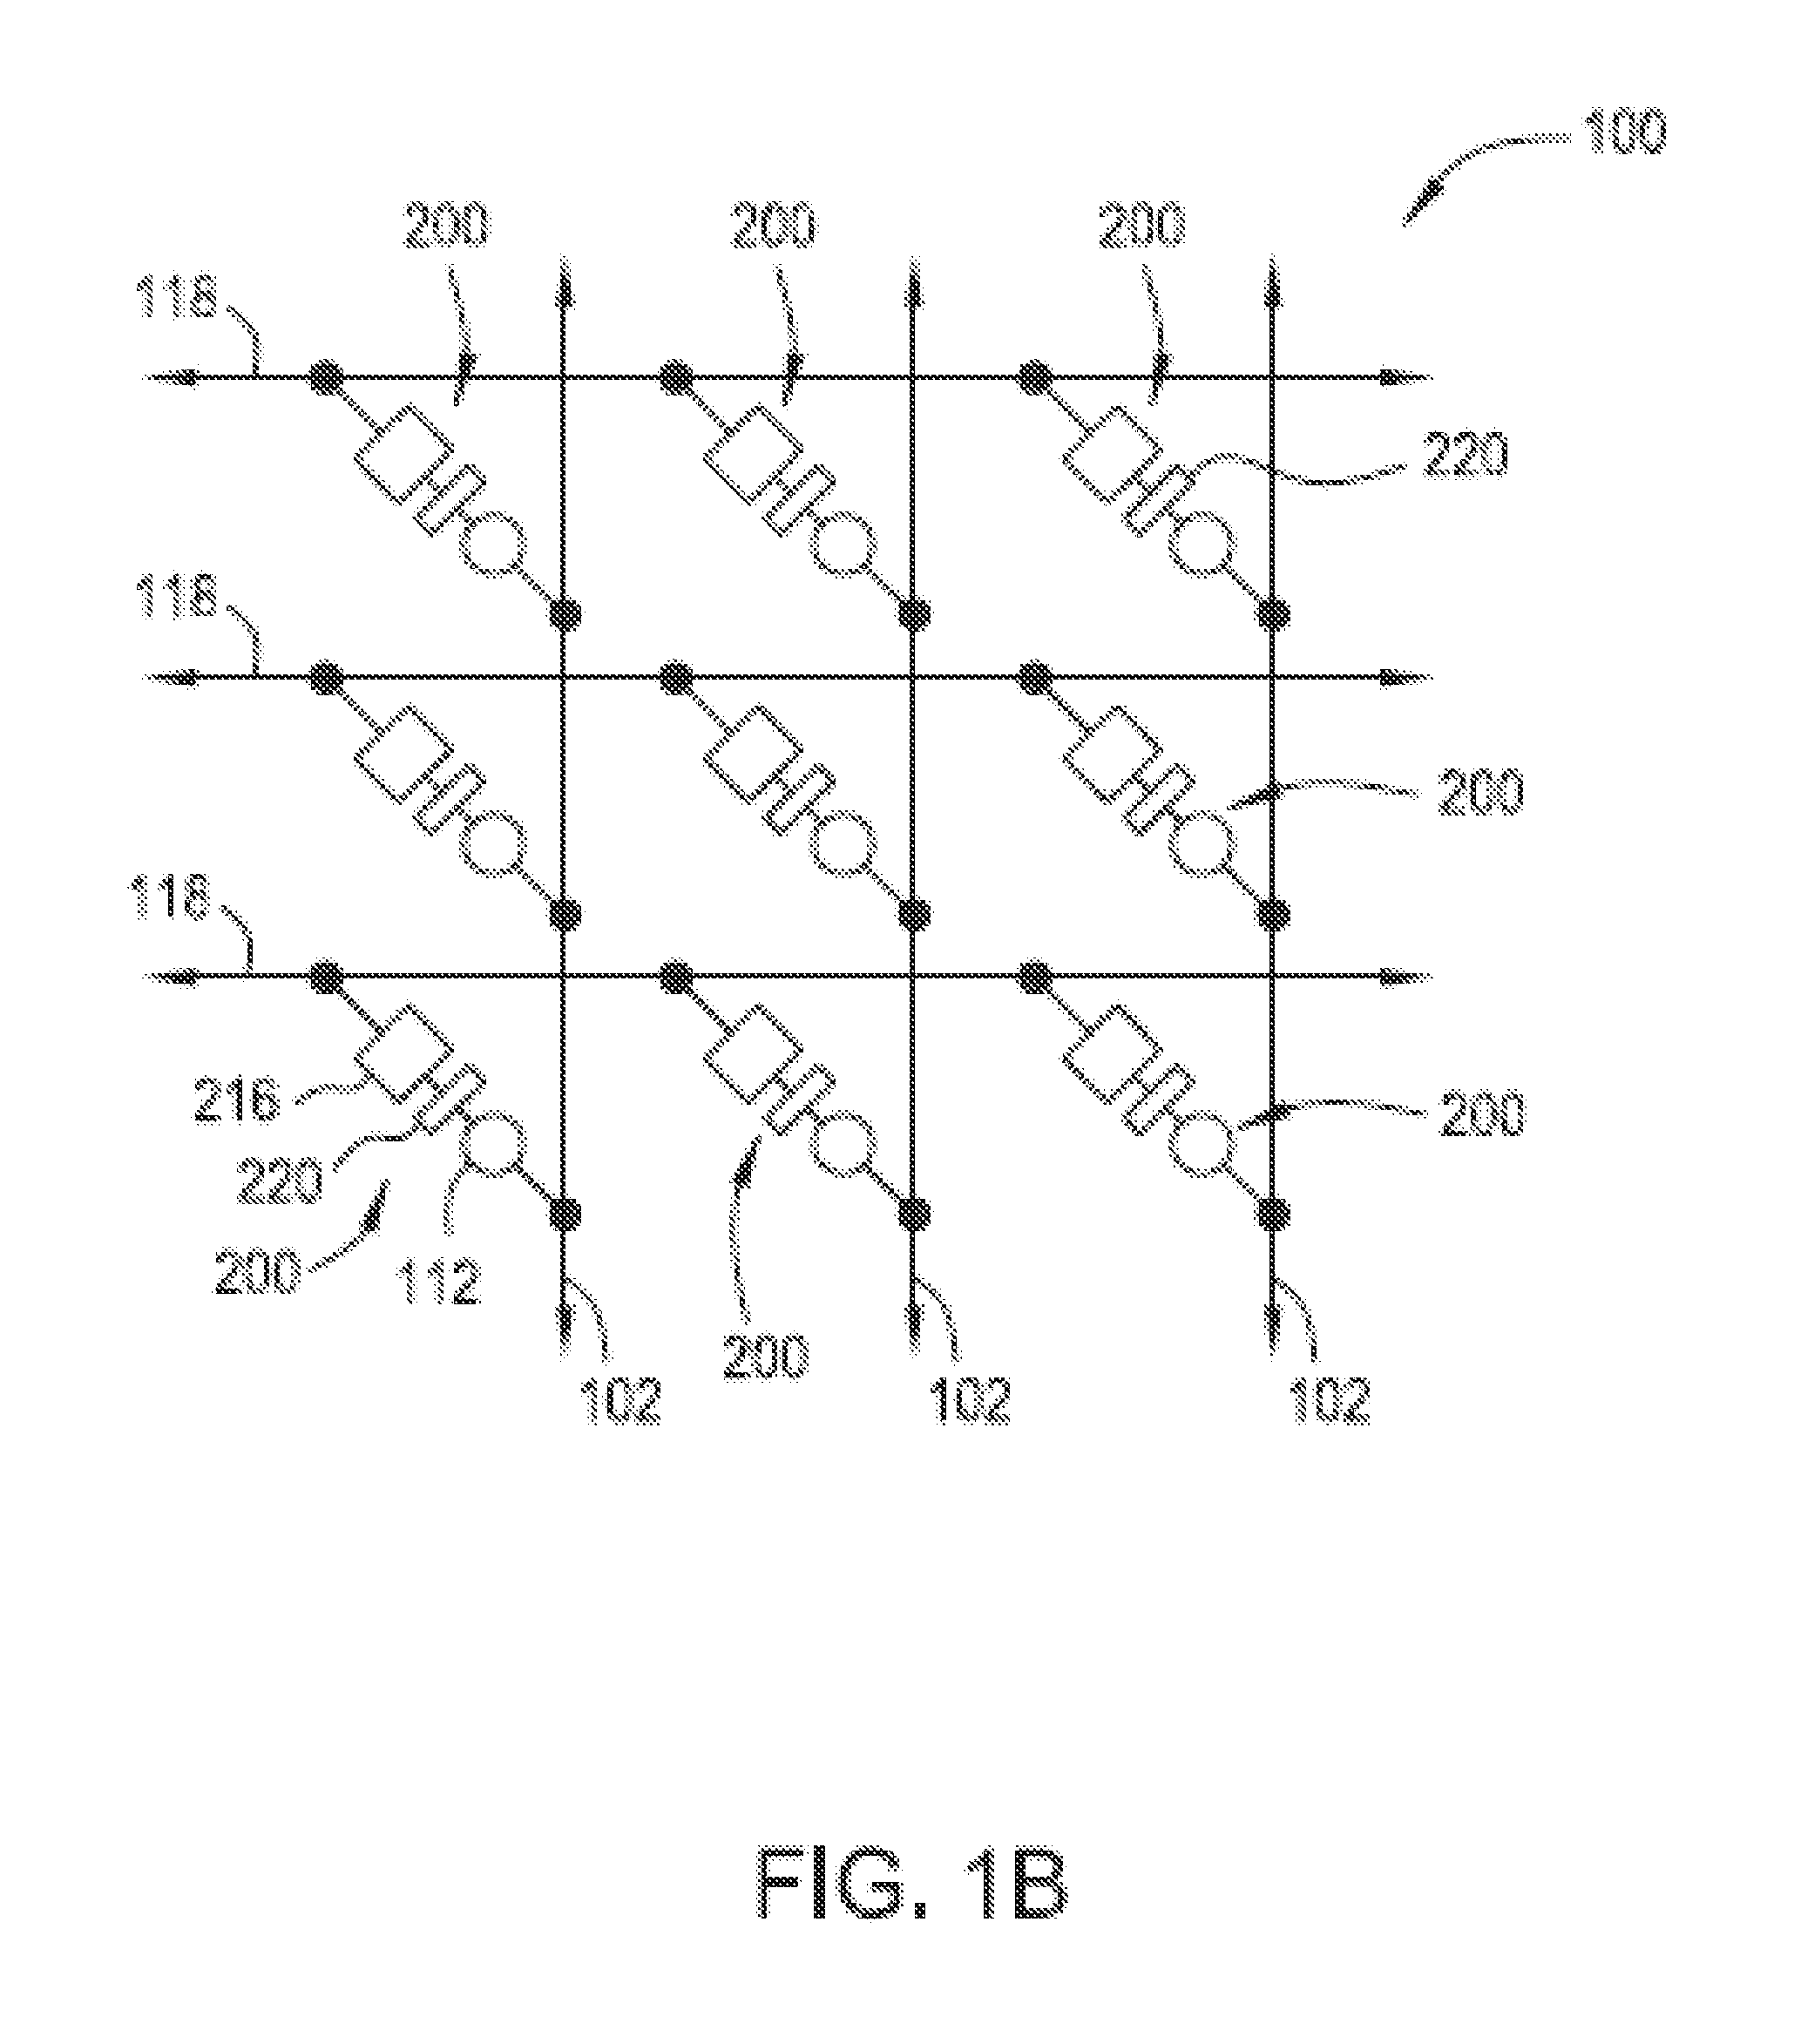 Memory Cell Having an Integrated Two-Terminal Current Limiting Resistor